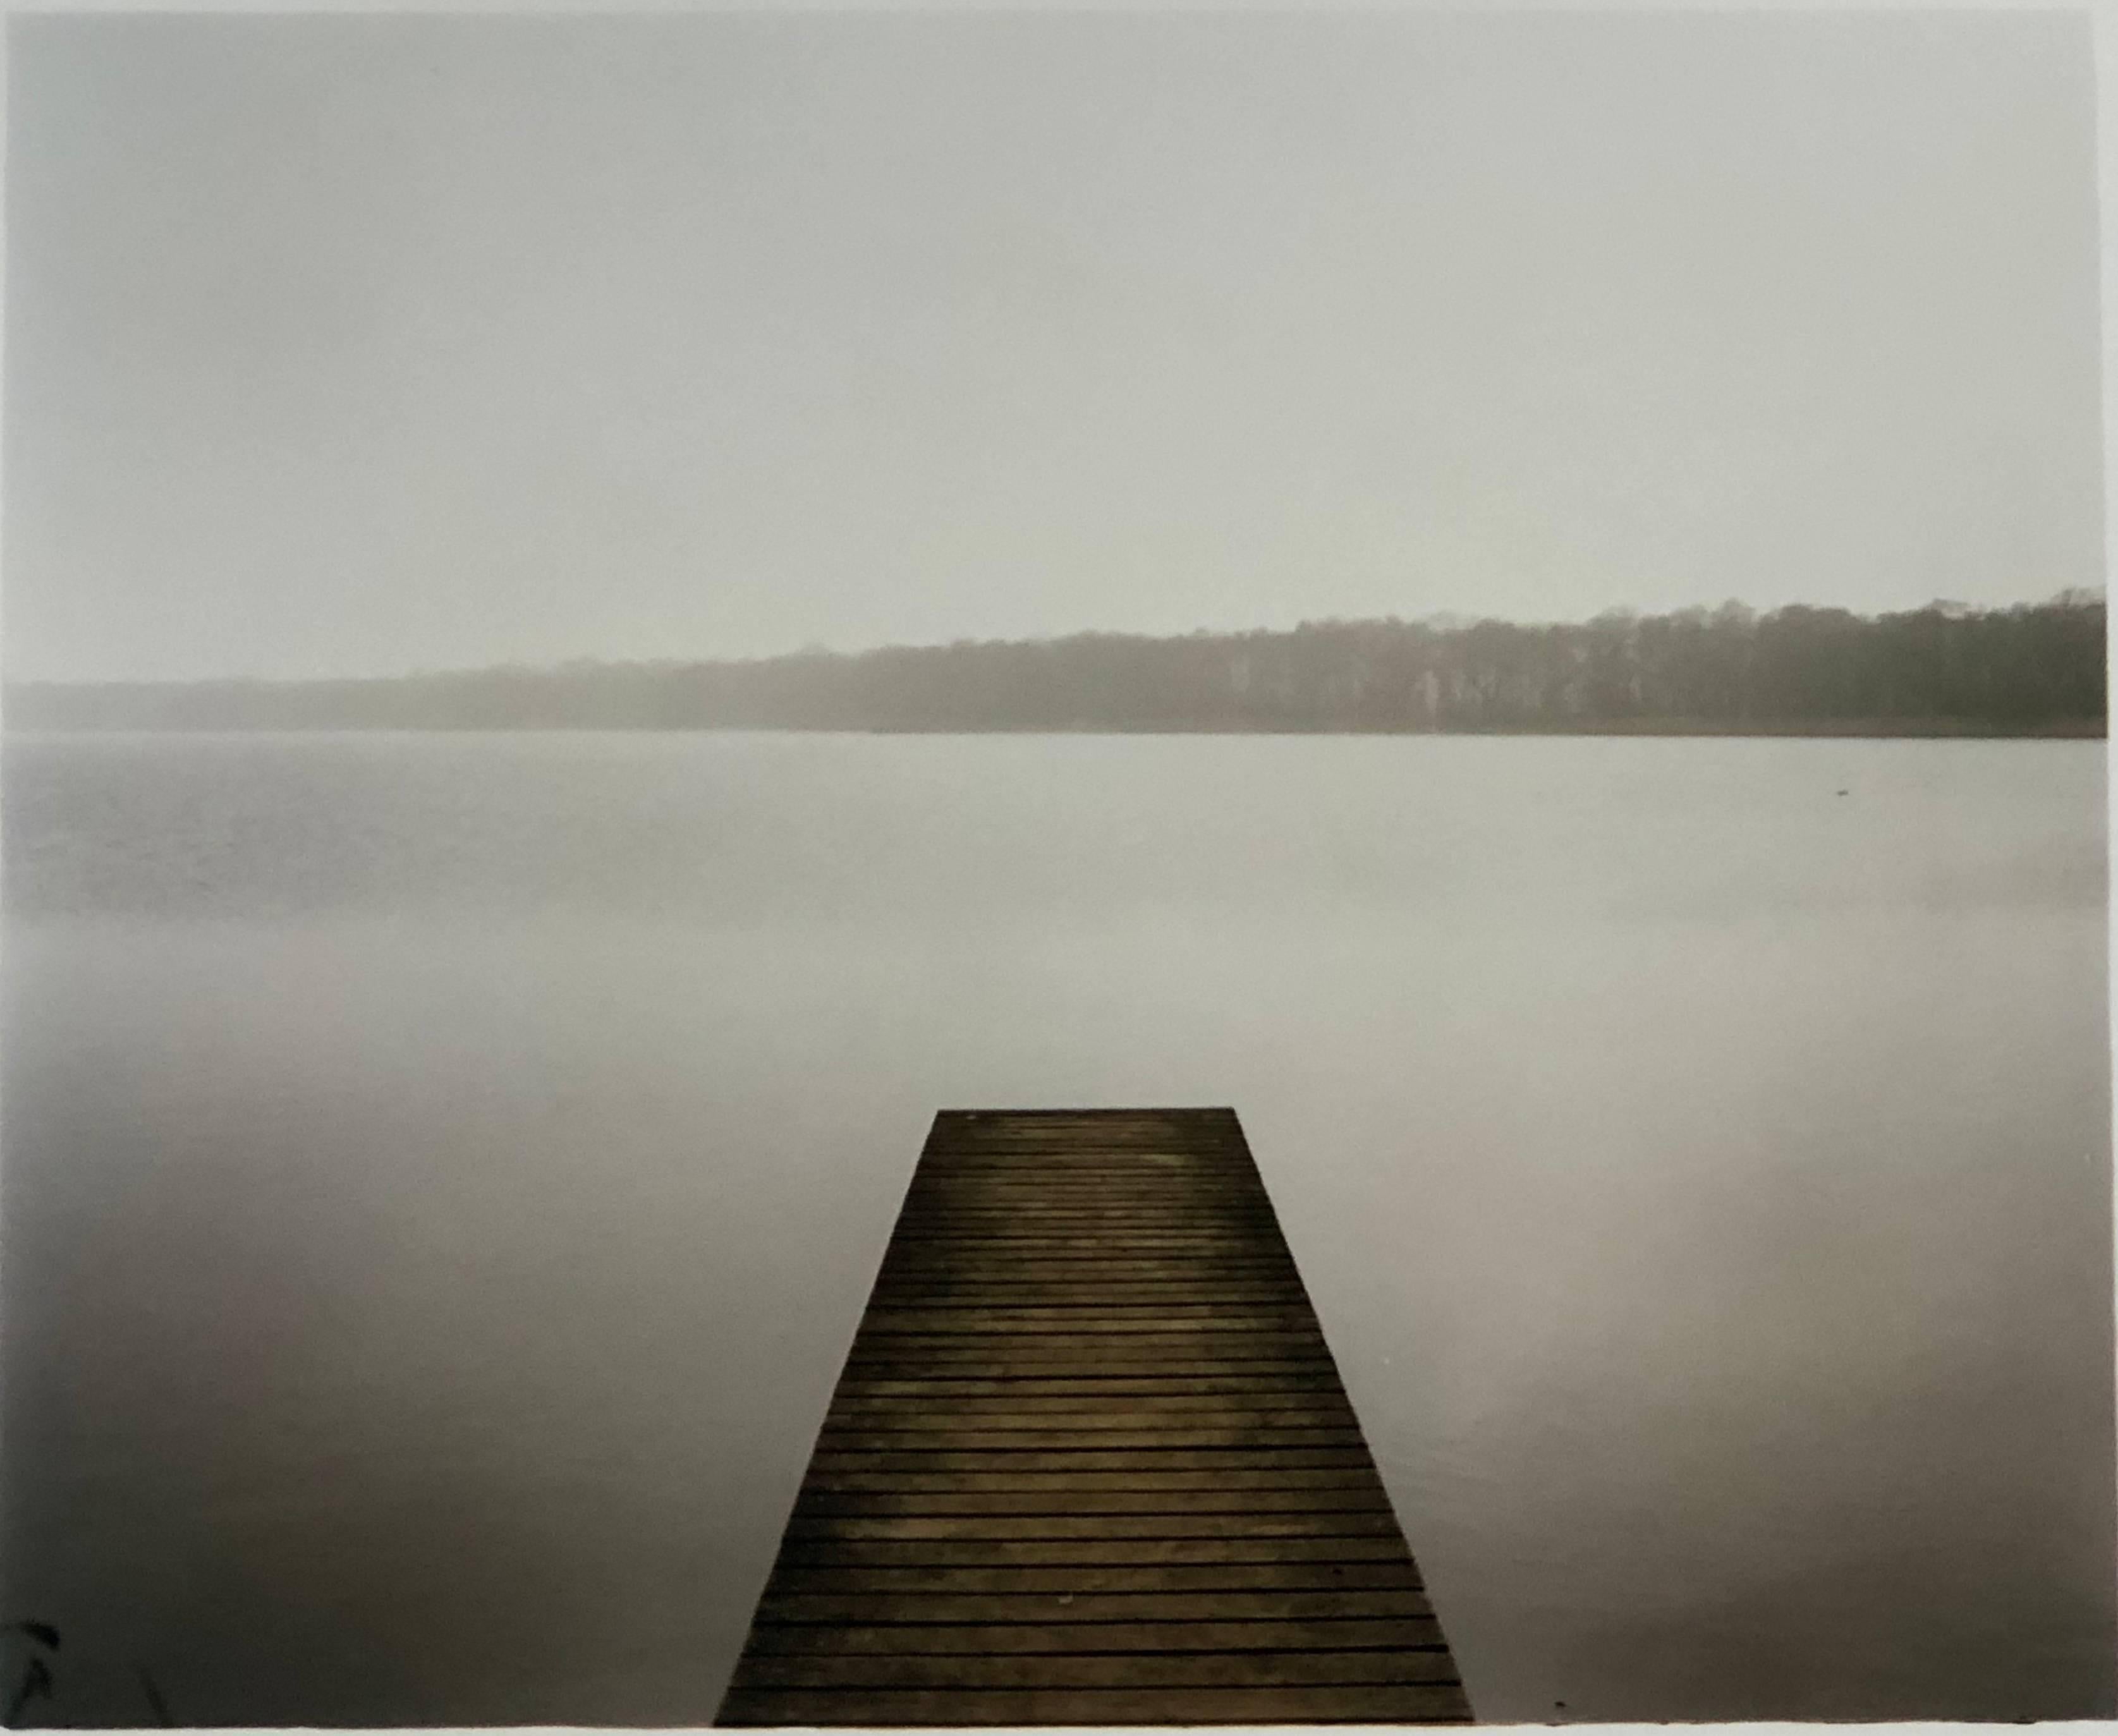 'Barton Broad' photographed by Richard Heeps in one of his favourite areas of Britain on the east coast in Norfolk. This peaceful almost monochrome landscape/waterscape creates a feeling of escapism from the hustle and bustle world.

This artwork is